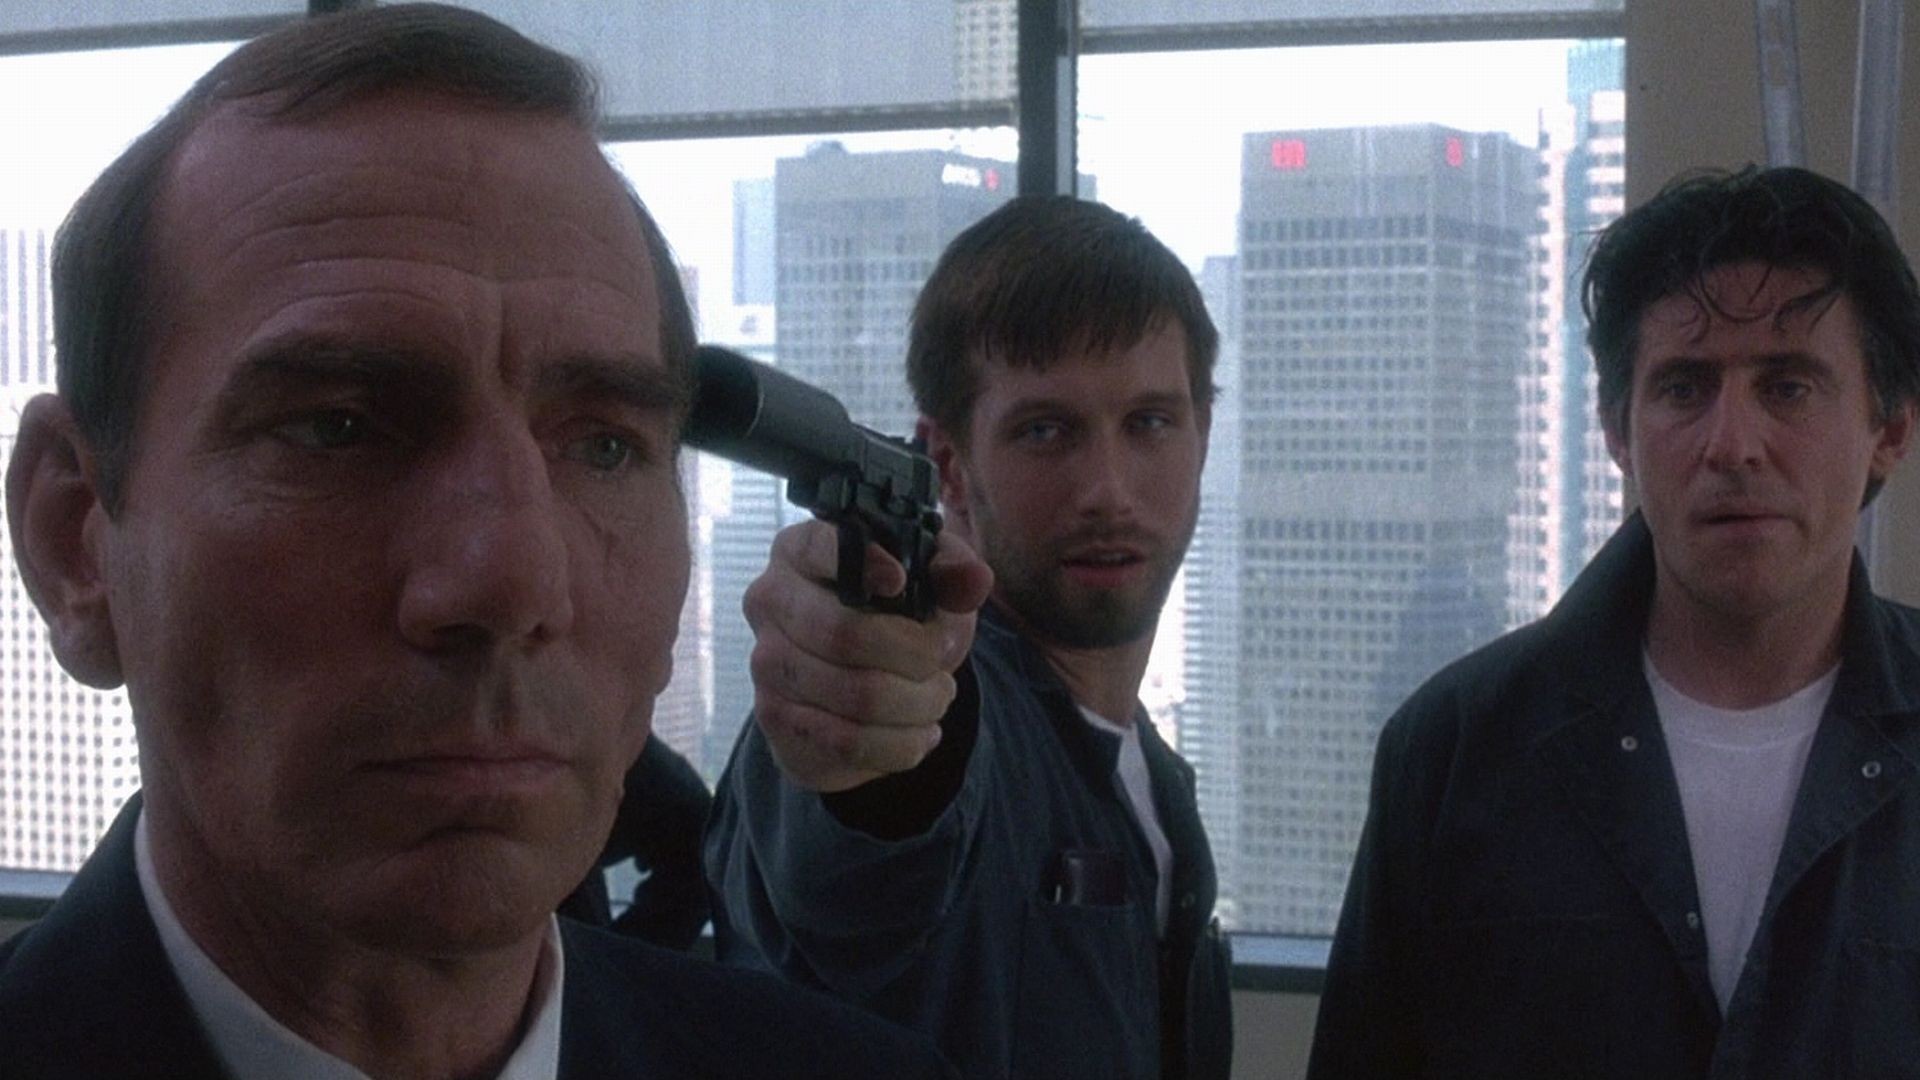 At the beginning of The Usual Suspects (1995), Keyser Söze is